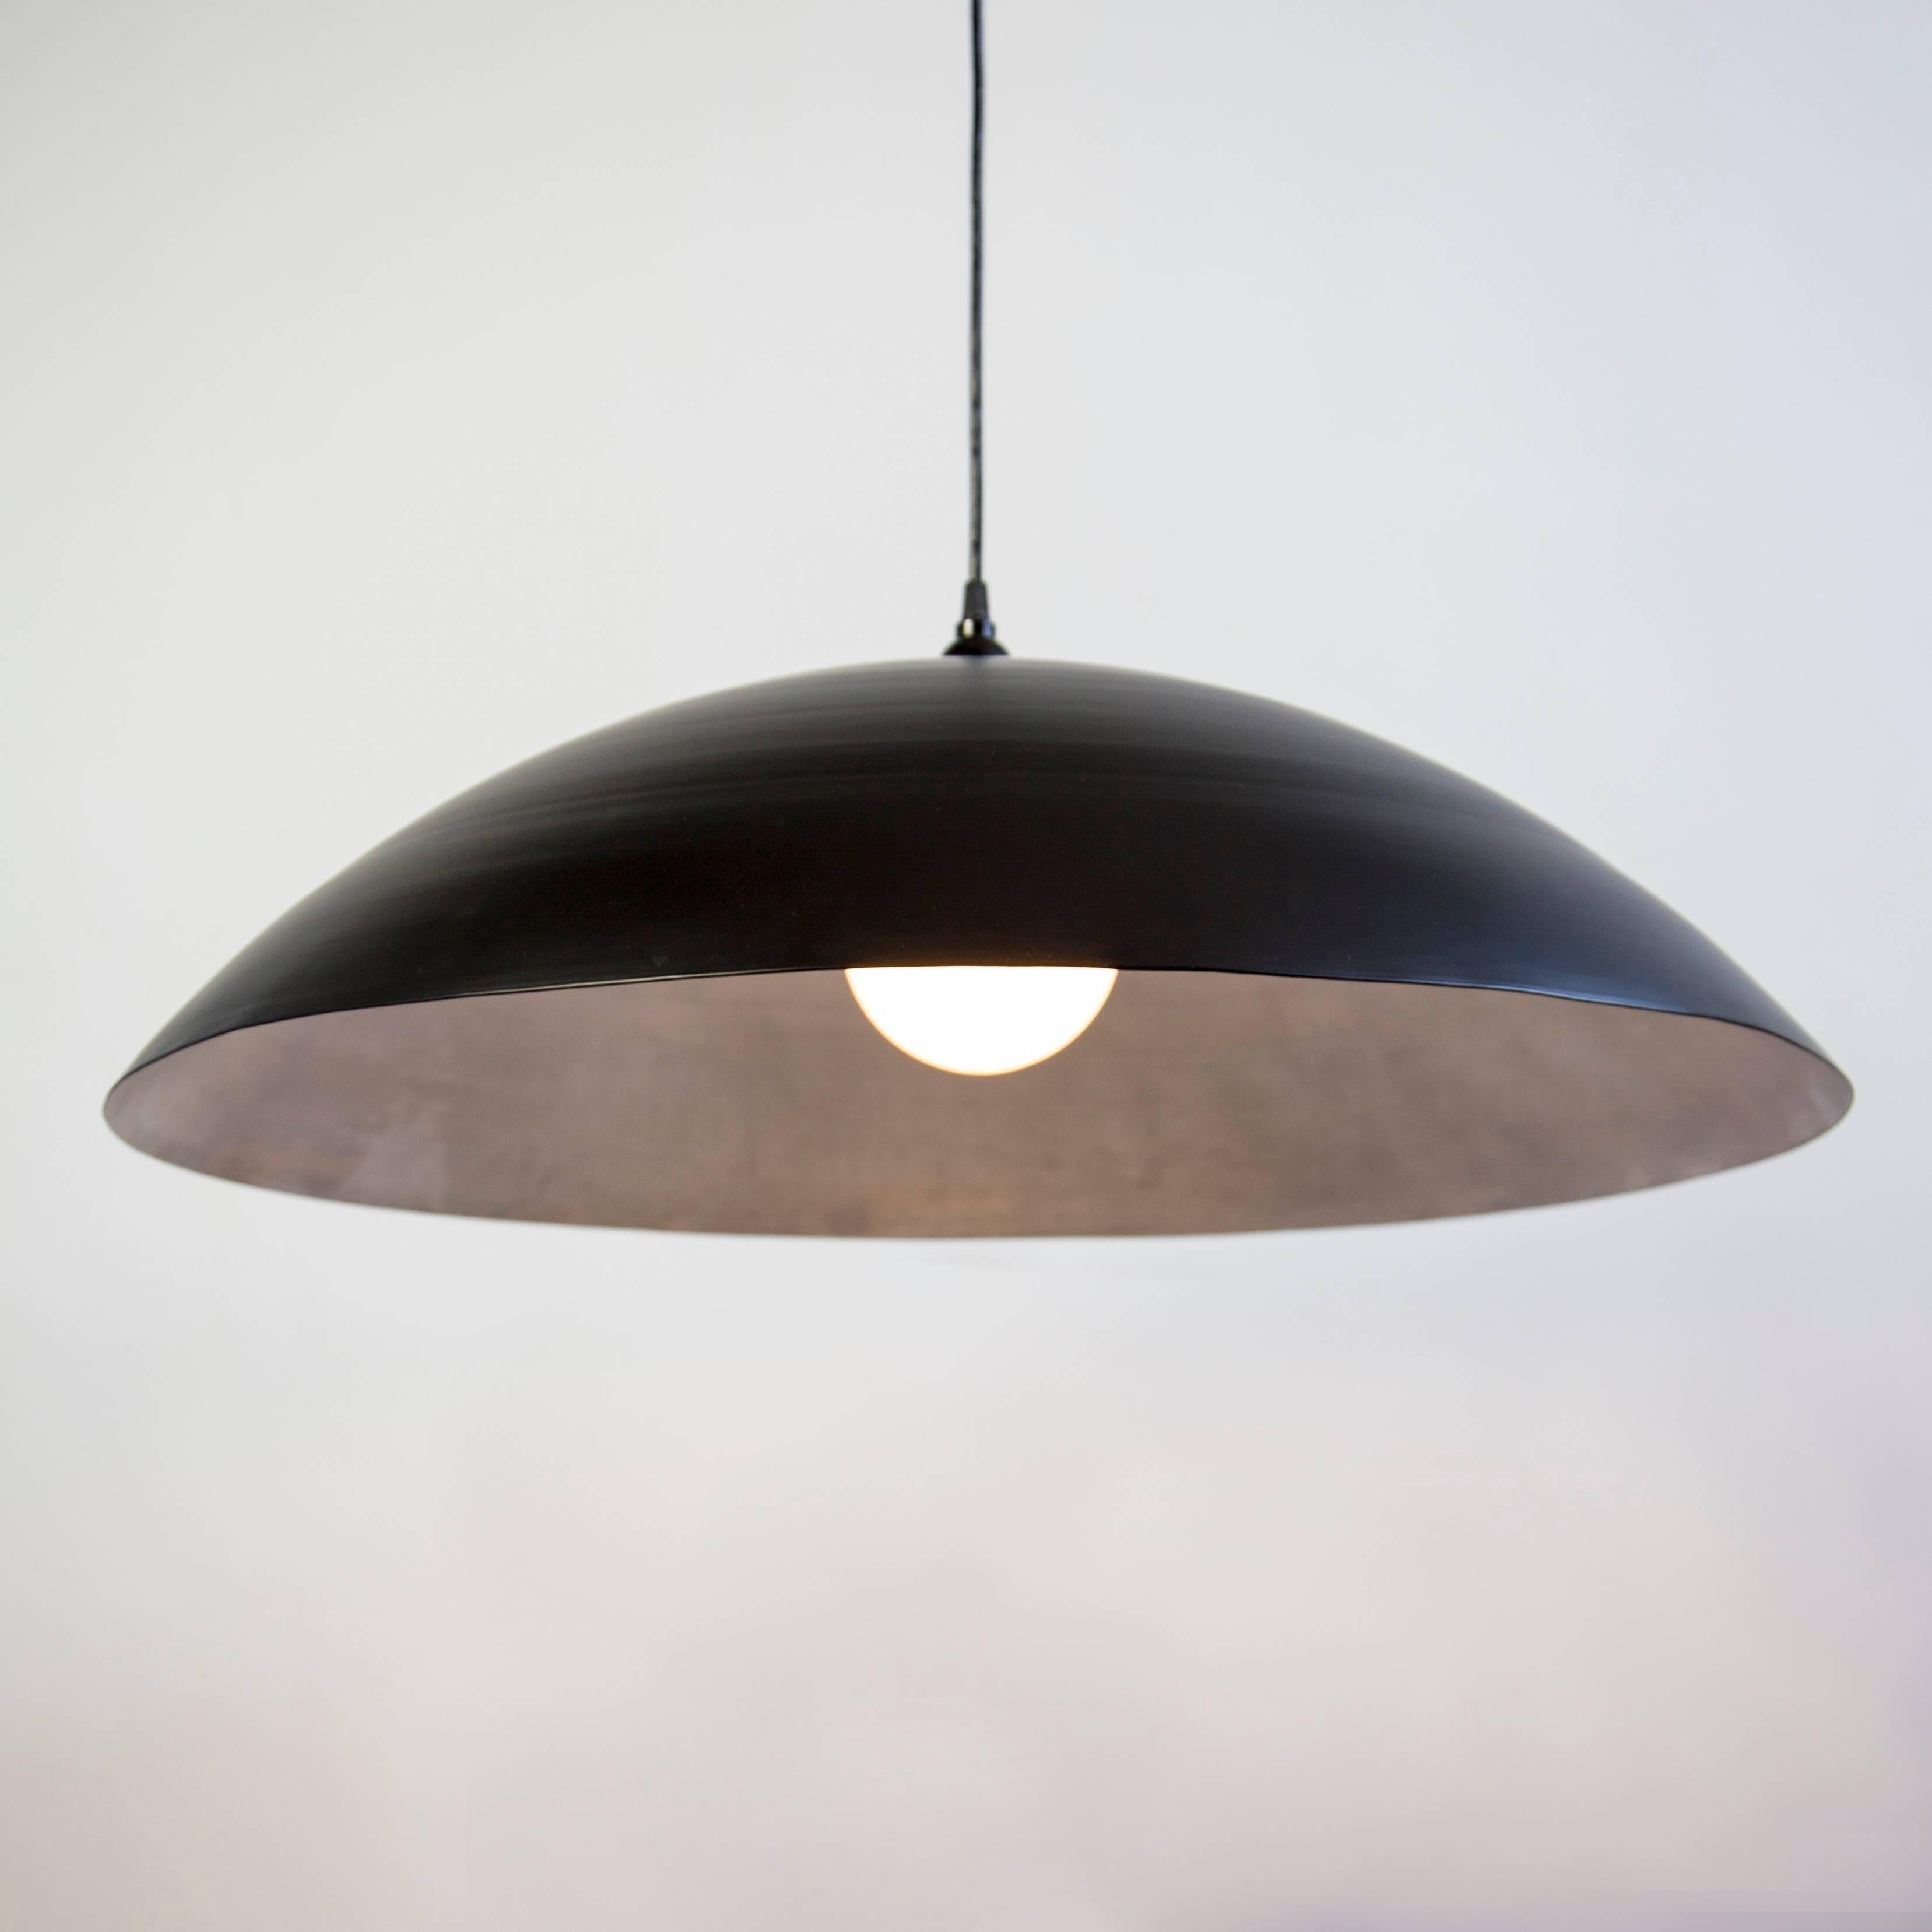 This listing is for 1x Industry Pendant in Terracotta & Waxed Aluminum designed and manufactured by RESEARCH Lighting.

Materials: Aluminum
Finish: Exterior is powder coated in terracotta, interior is waxed aluminum
Electronics: 1x E26 Socket, G40